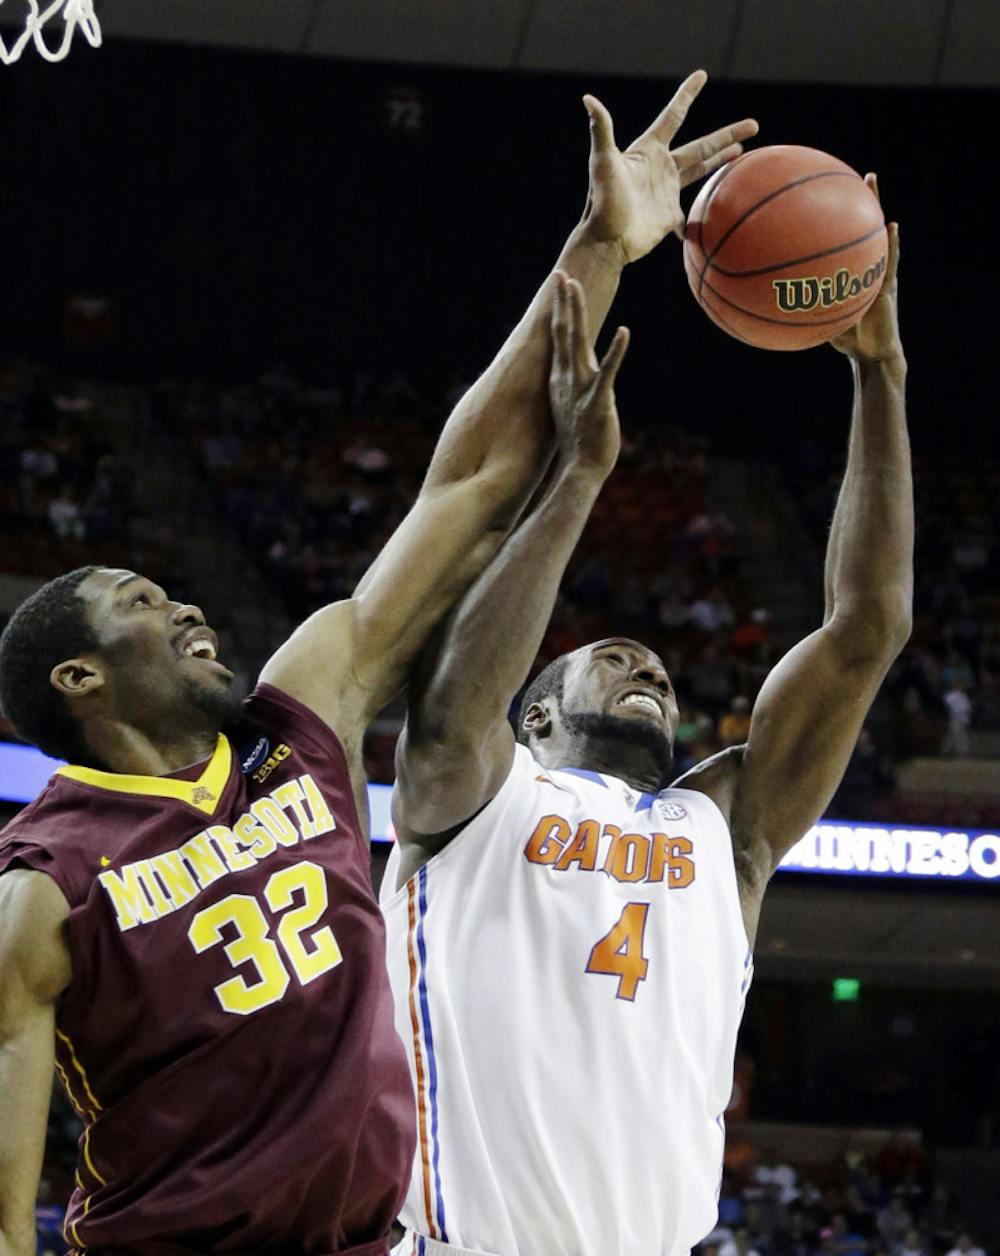 <p class="p1">Center Patric Young pulls down a rebound during Florida’s 78-64 win against Minnesota on March 24 in Austin, Texas. Young had surgery to remove a bone spur in his right ankle on Friday.</p>